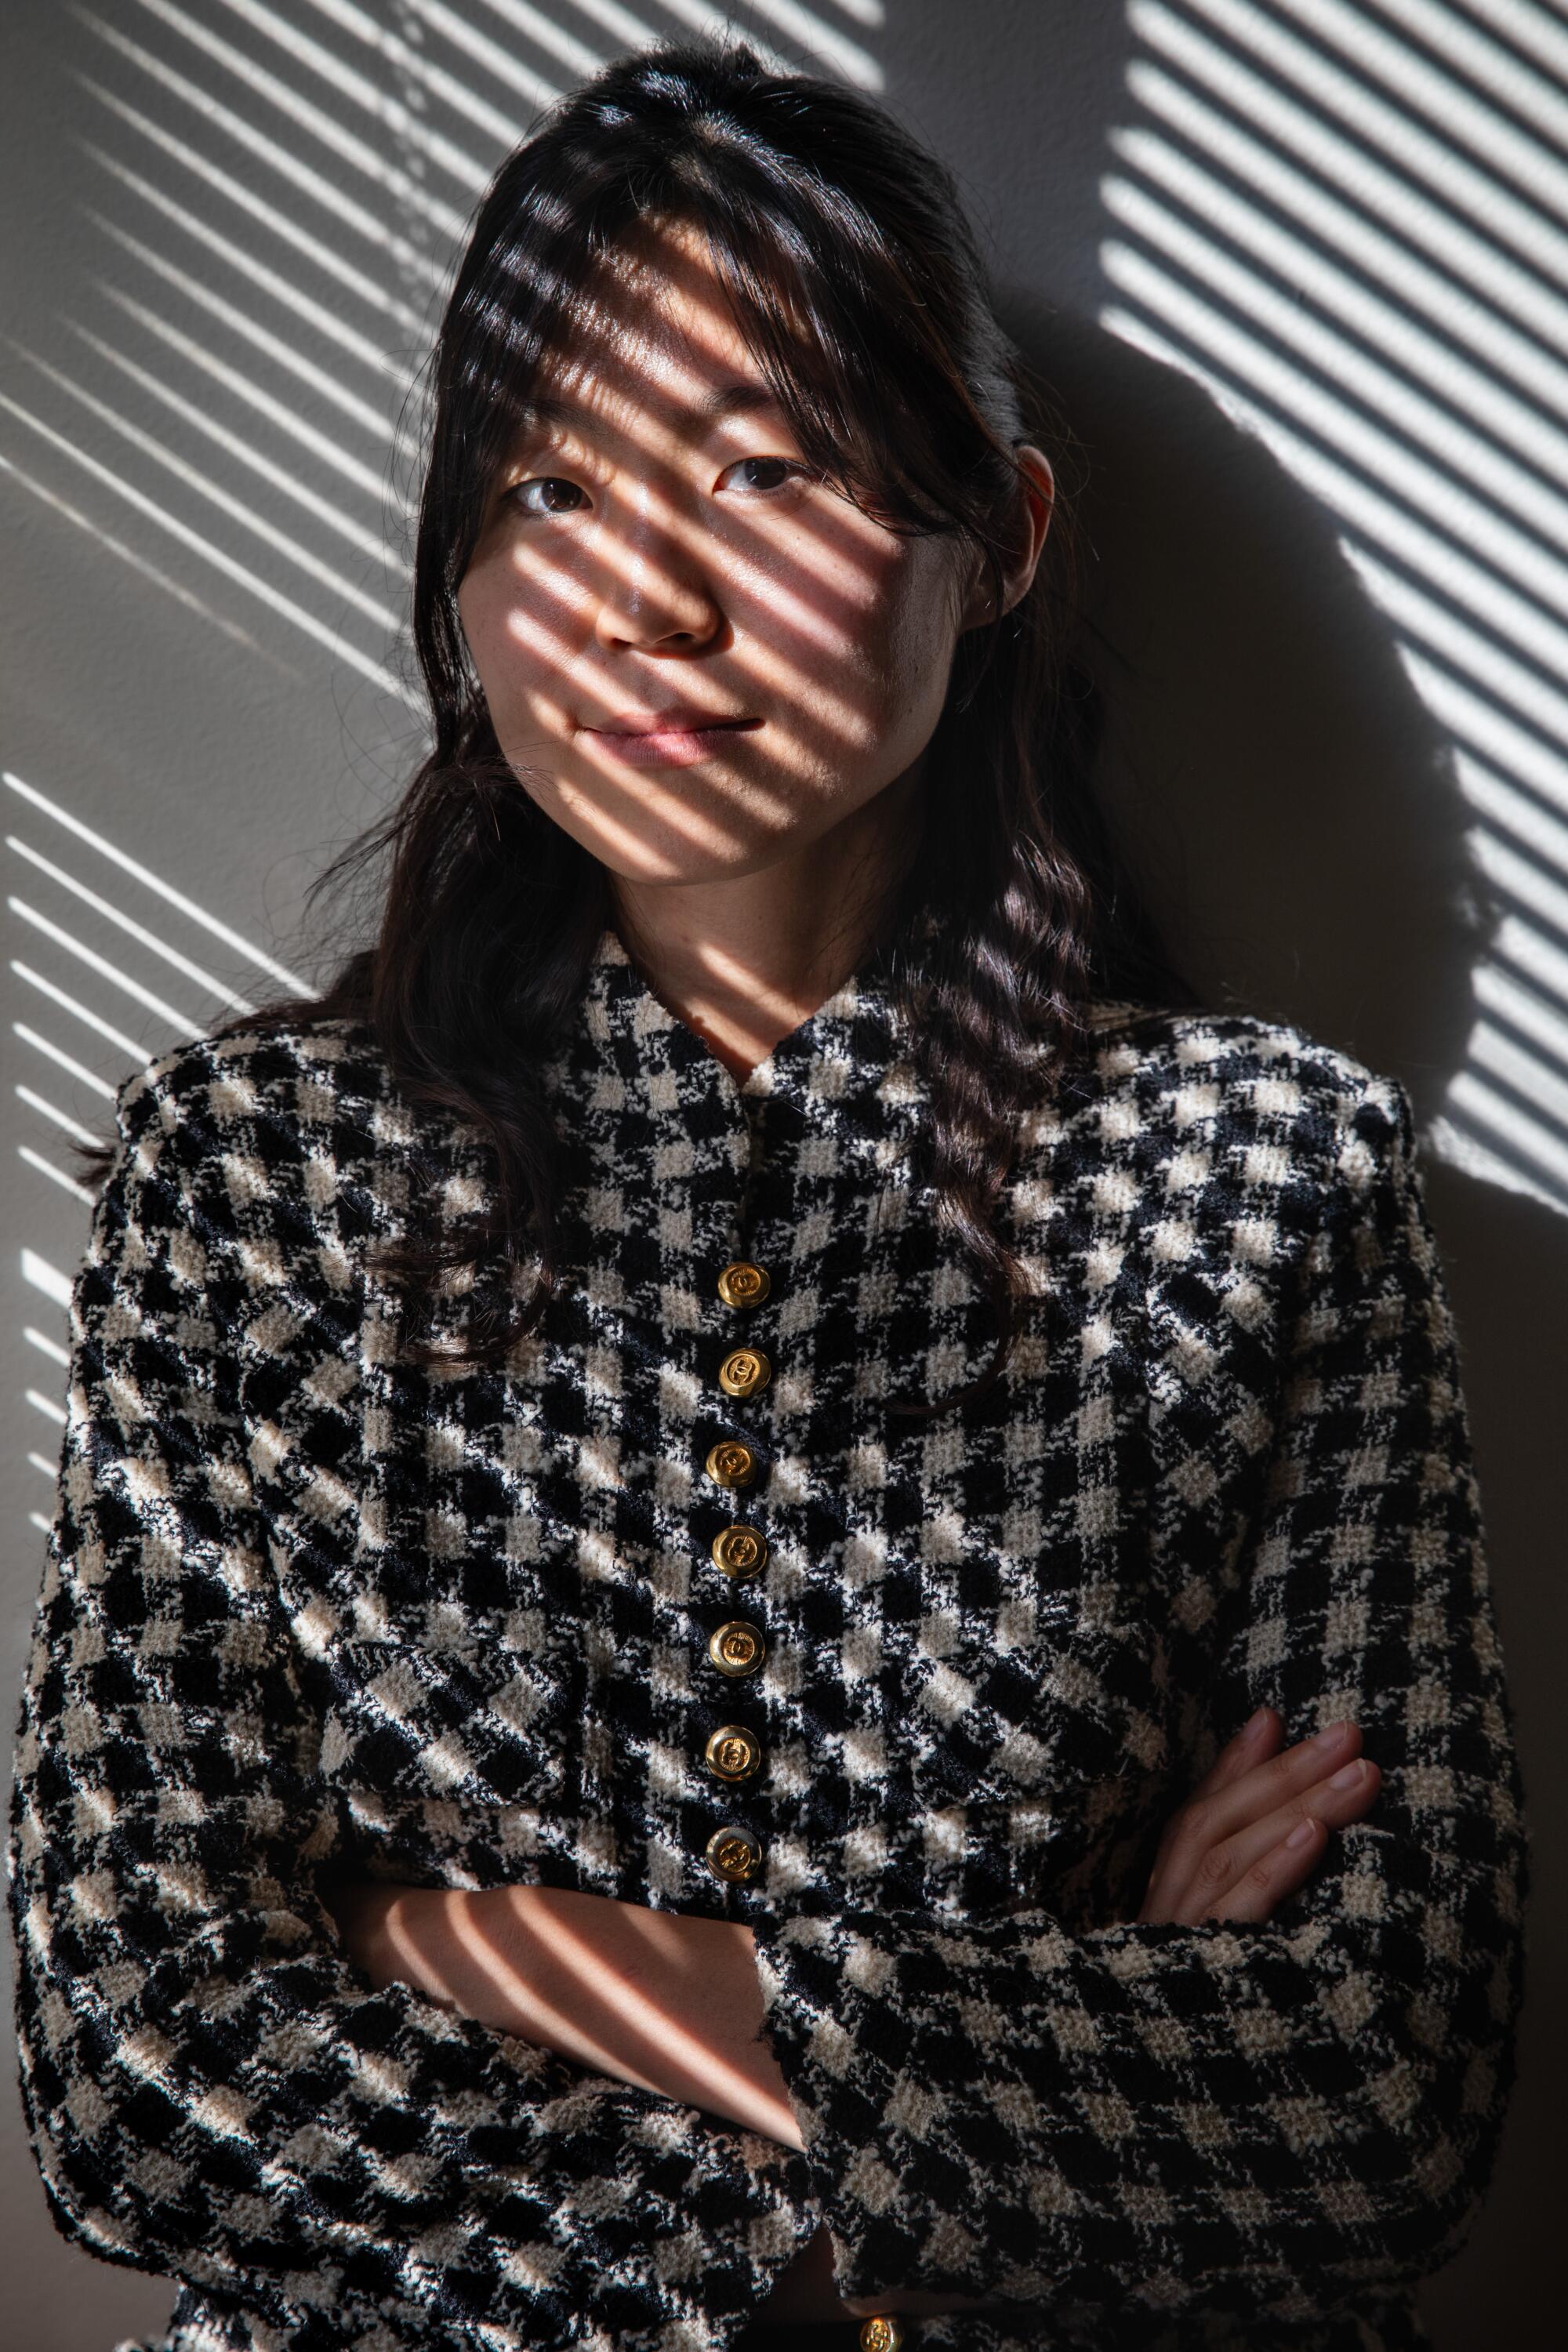 Juyoung Yoon, wearing a houndstooth jacket, sits near a window, lighted by a striped light streaming in through blinds